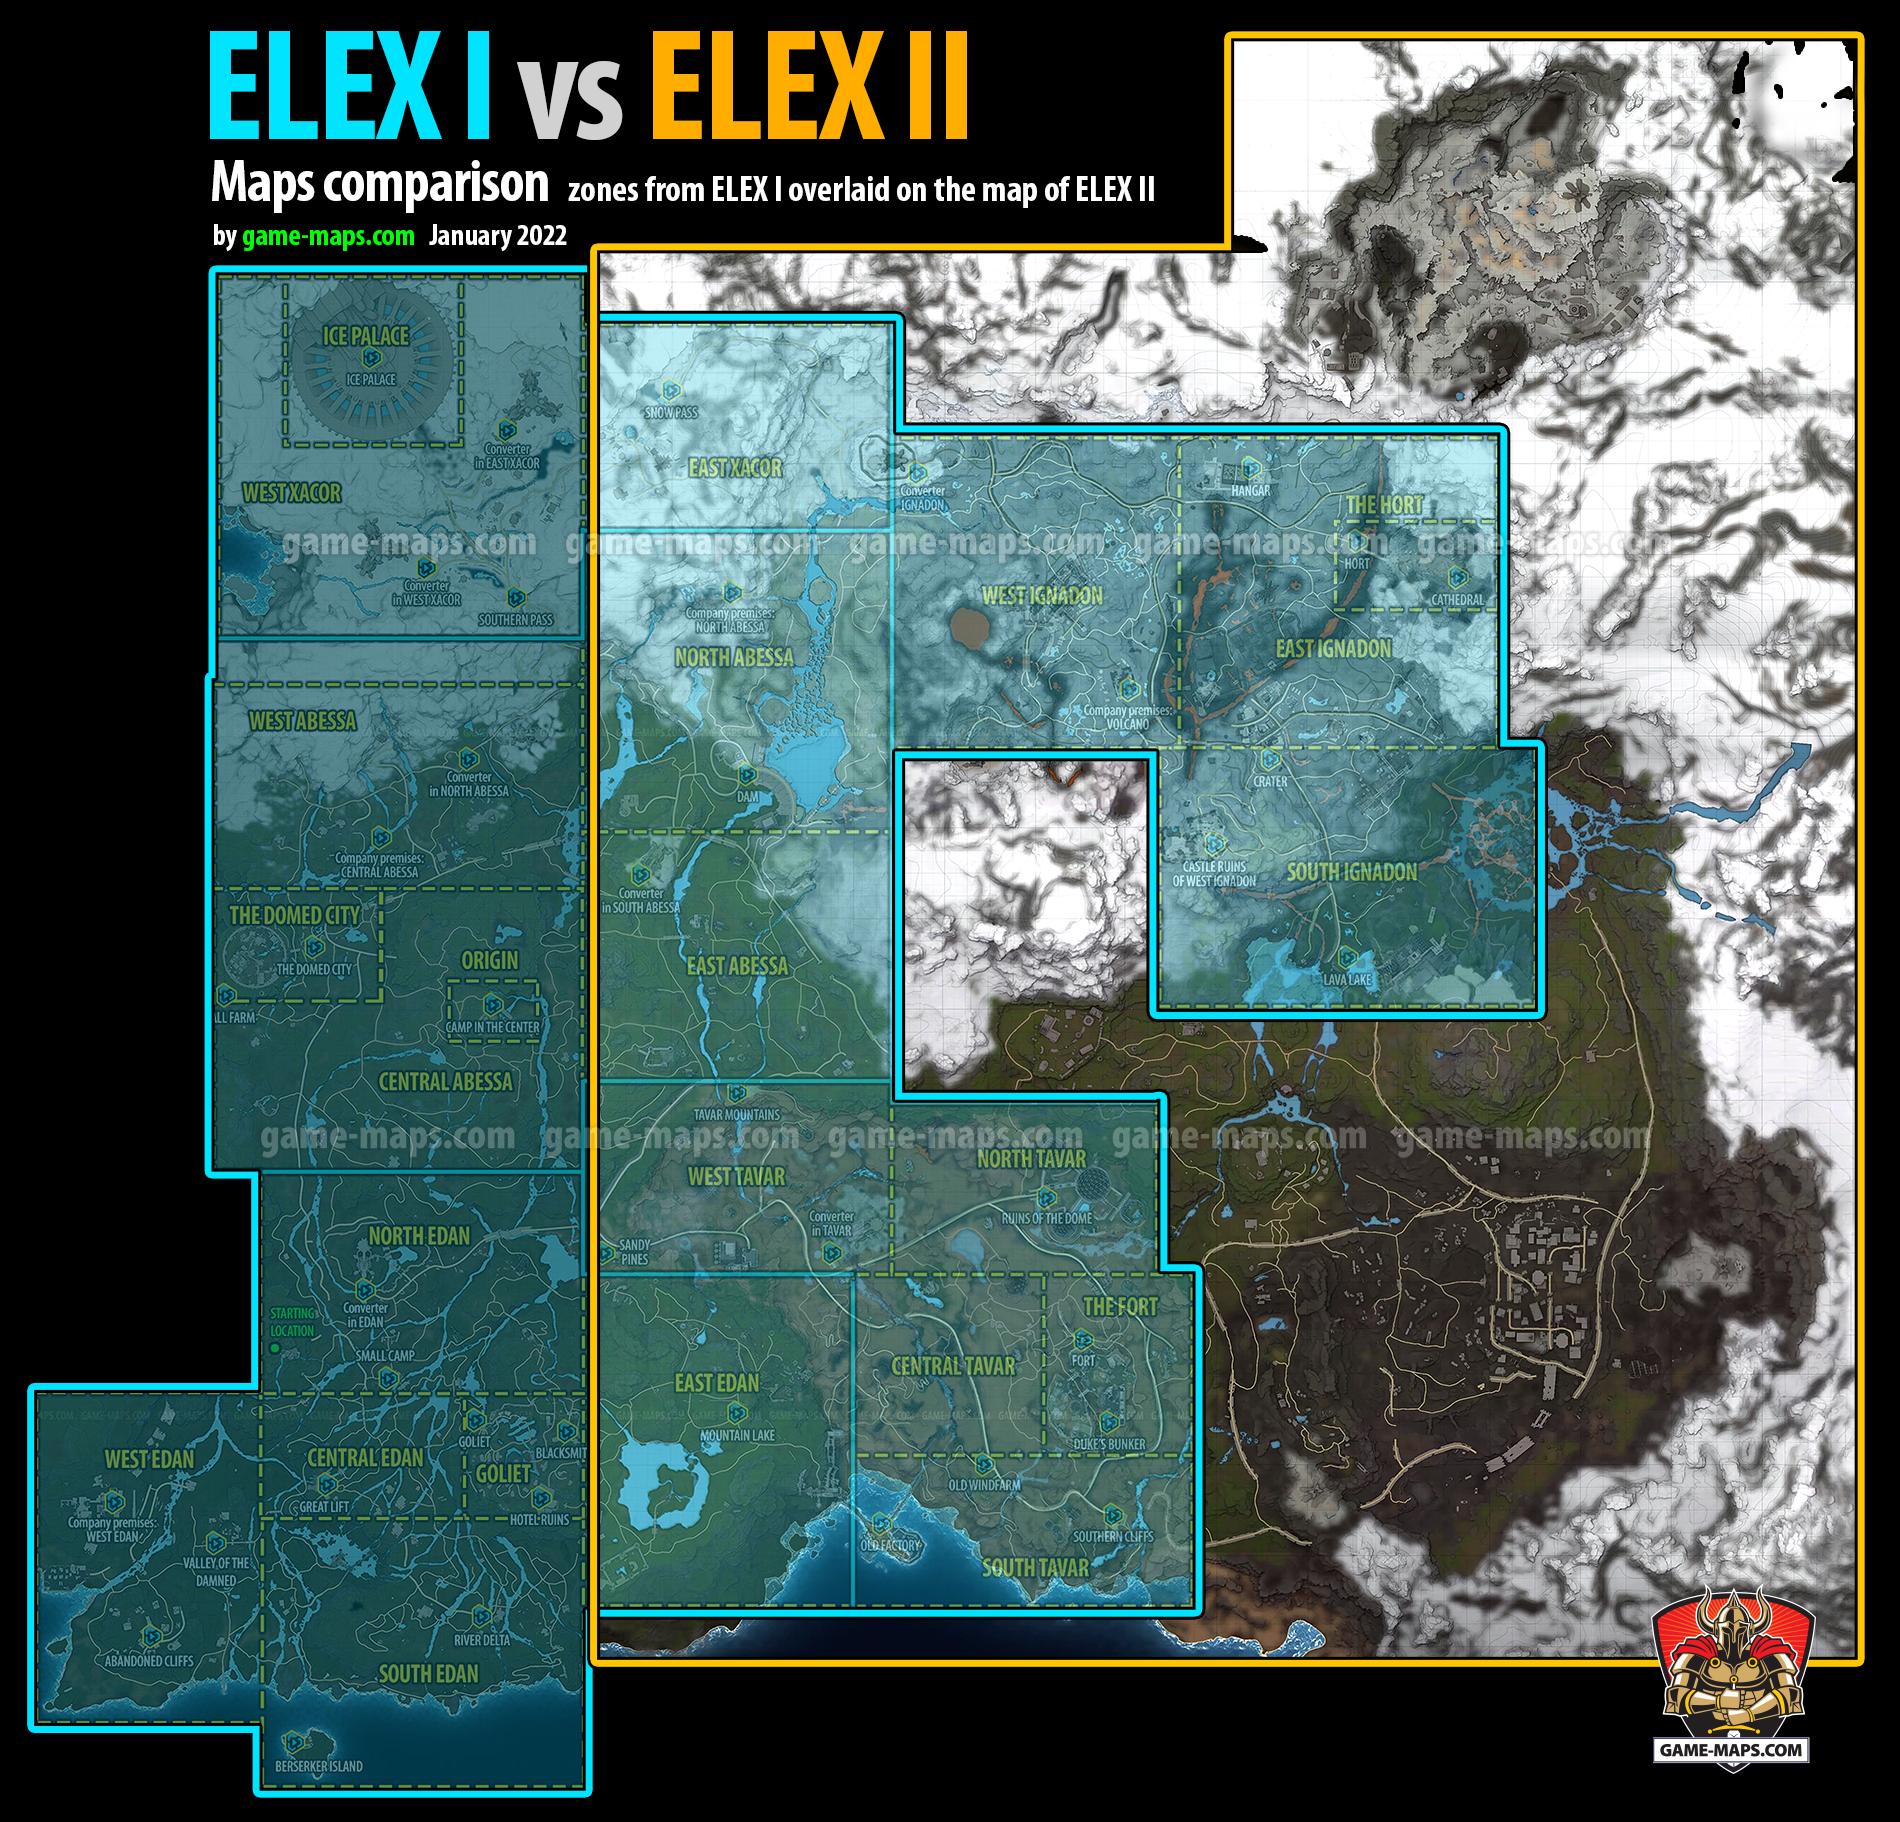 Compare the size of the play area of ELEX I to ELEX II map